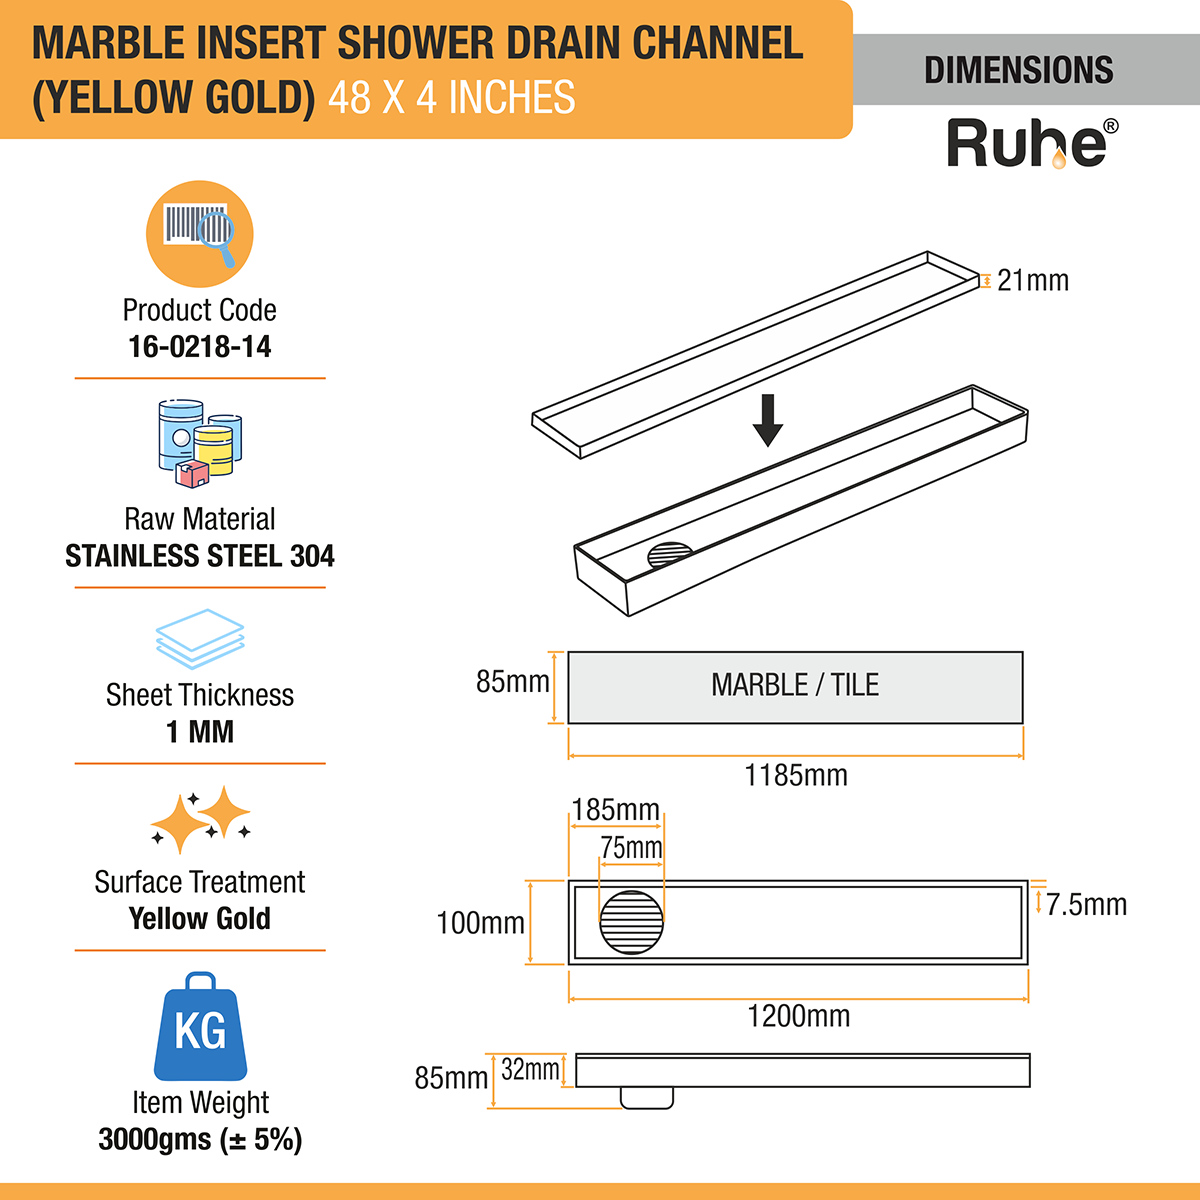 Marble Insert Shower Drain Channel (48 x 4 Inches) YELLOW GOLD PVD Coated dimensions and sizes